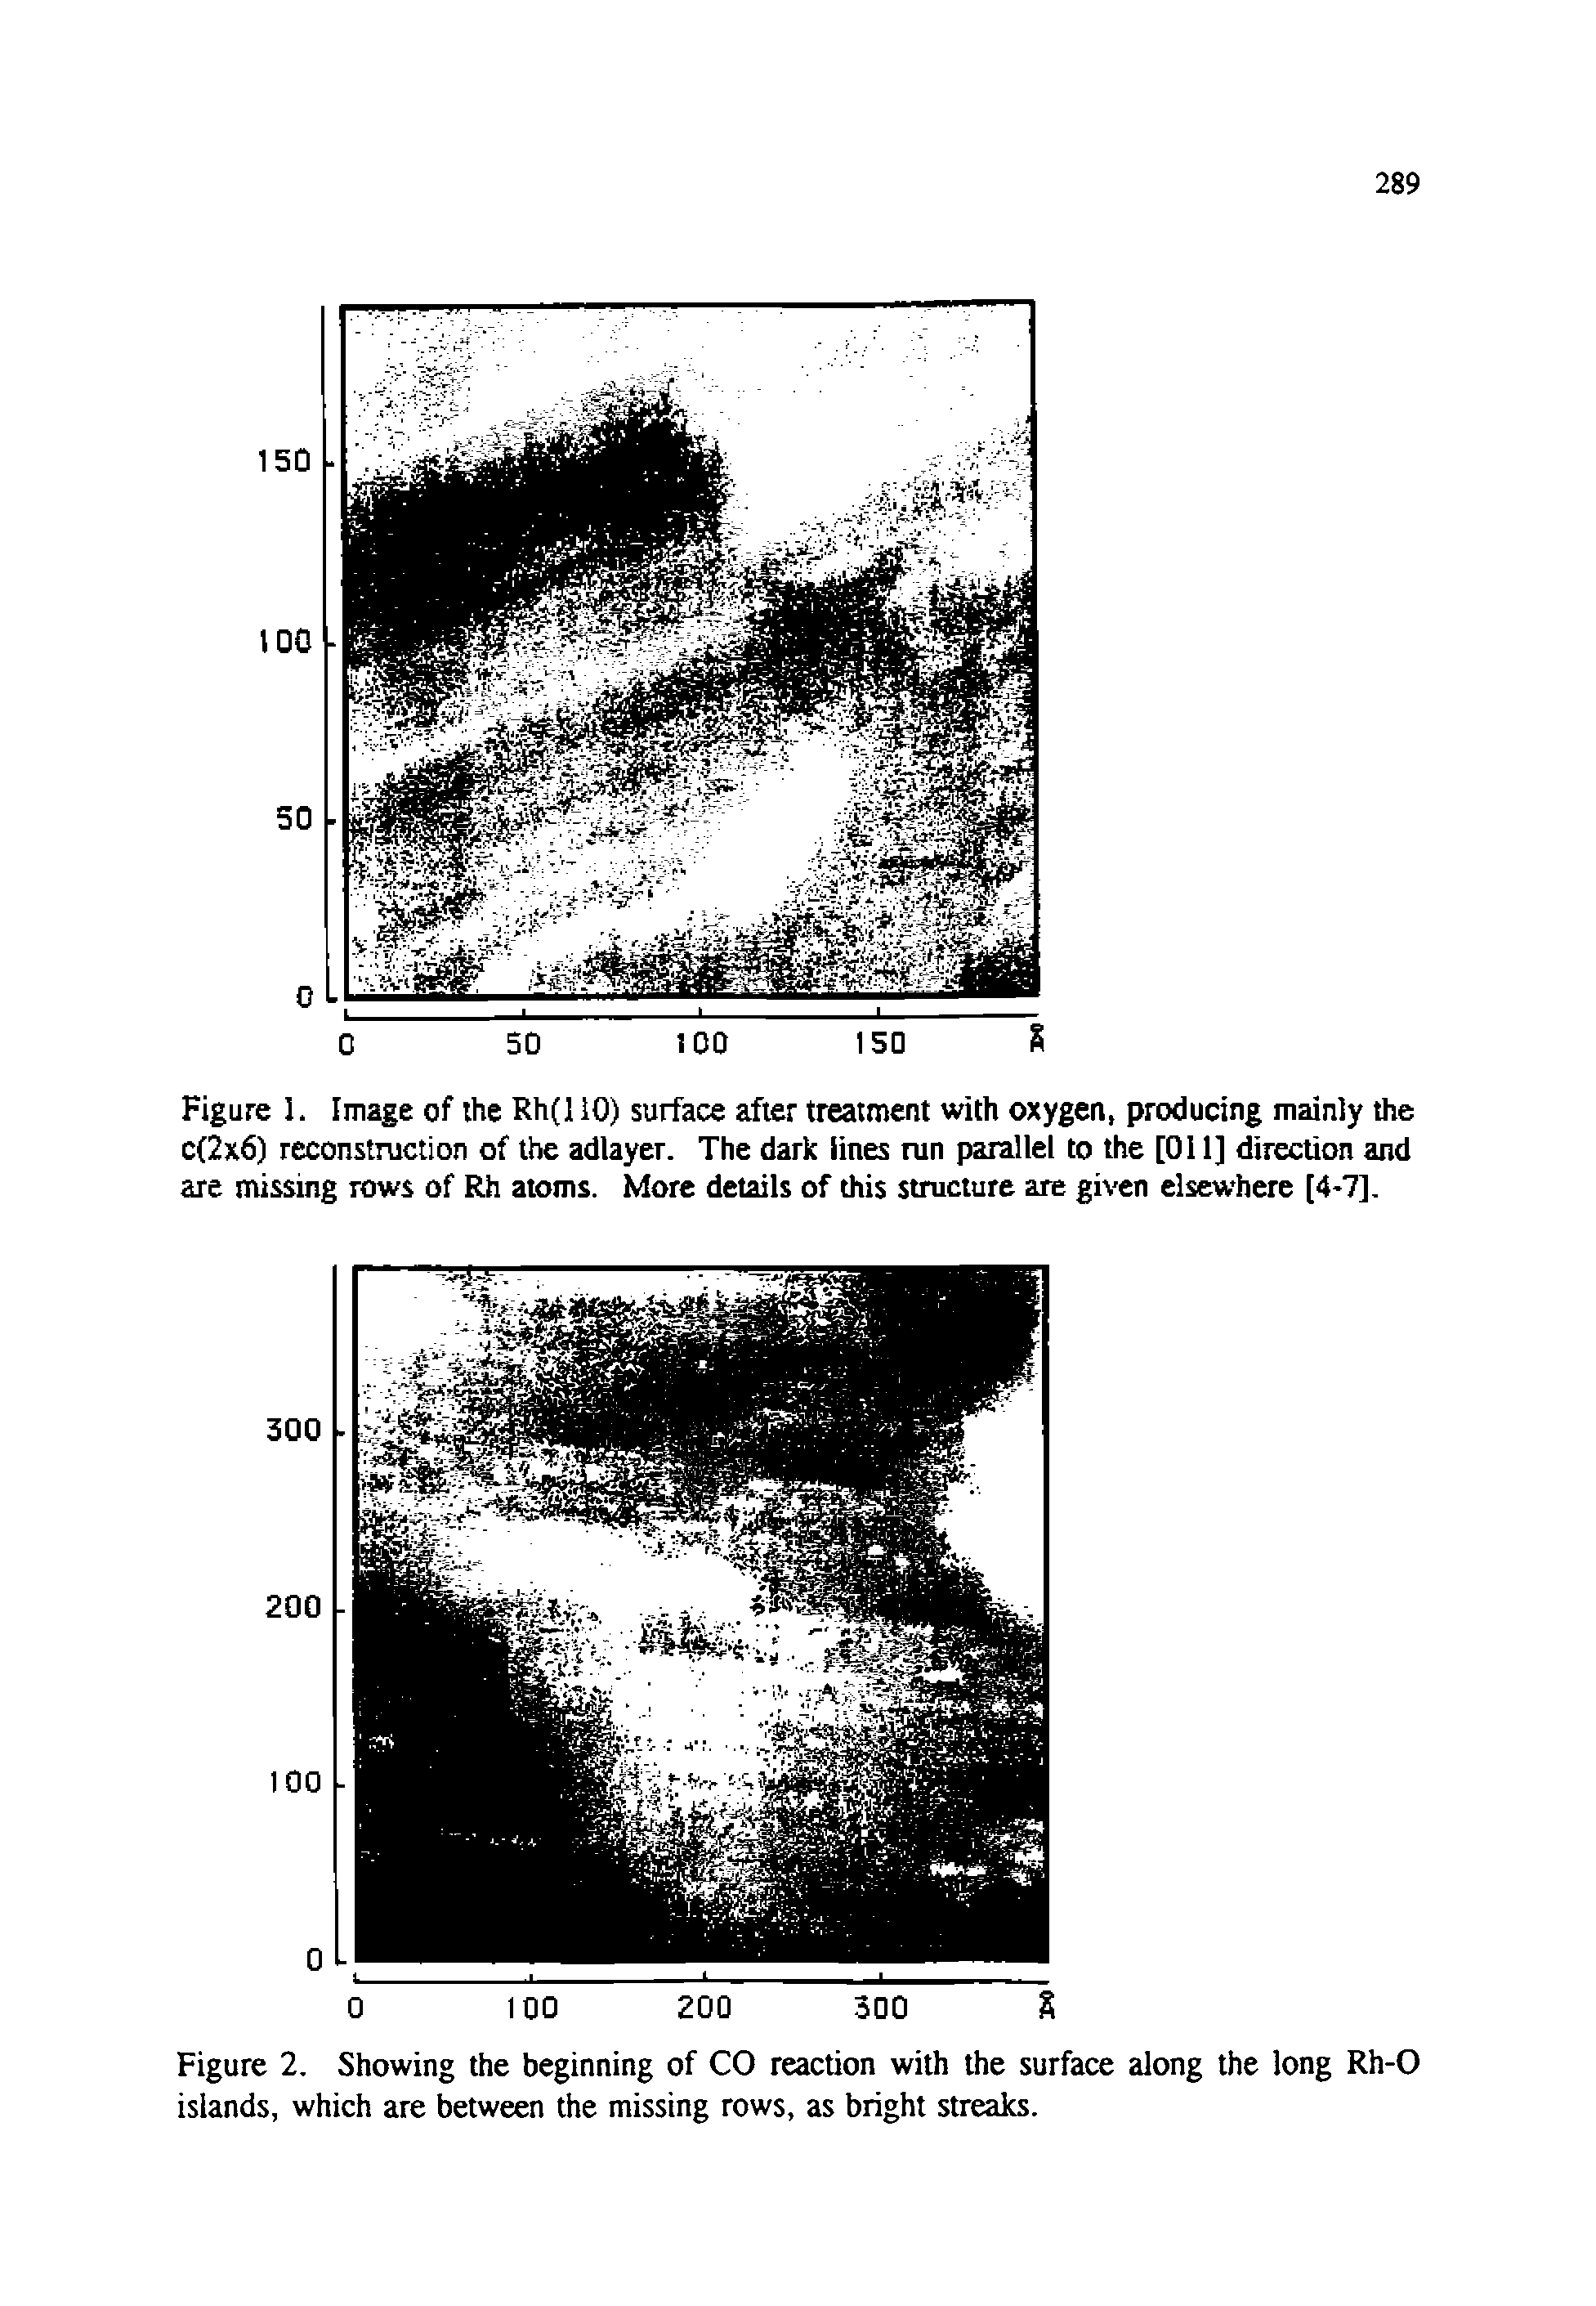 Figure 1. Image of the Rh(110) surface after treatment with oxygen, producing mainly the c(2x6) reconstruction of the adlayer. The dark lines run parallel to the [011] direcUon and are missing rows of Rh atoms. More details of this structure are given elsewhere [4-7].